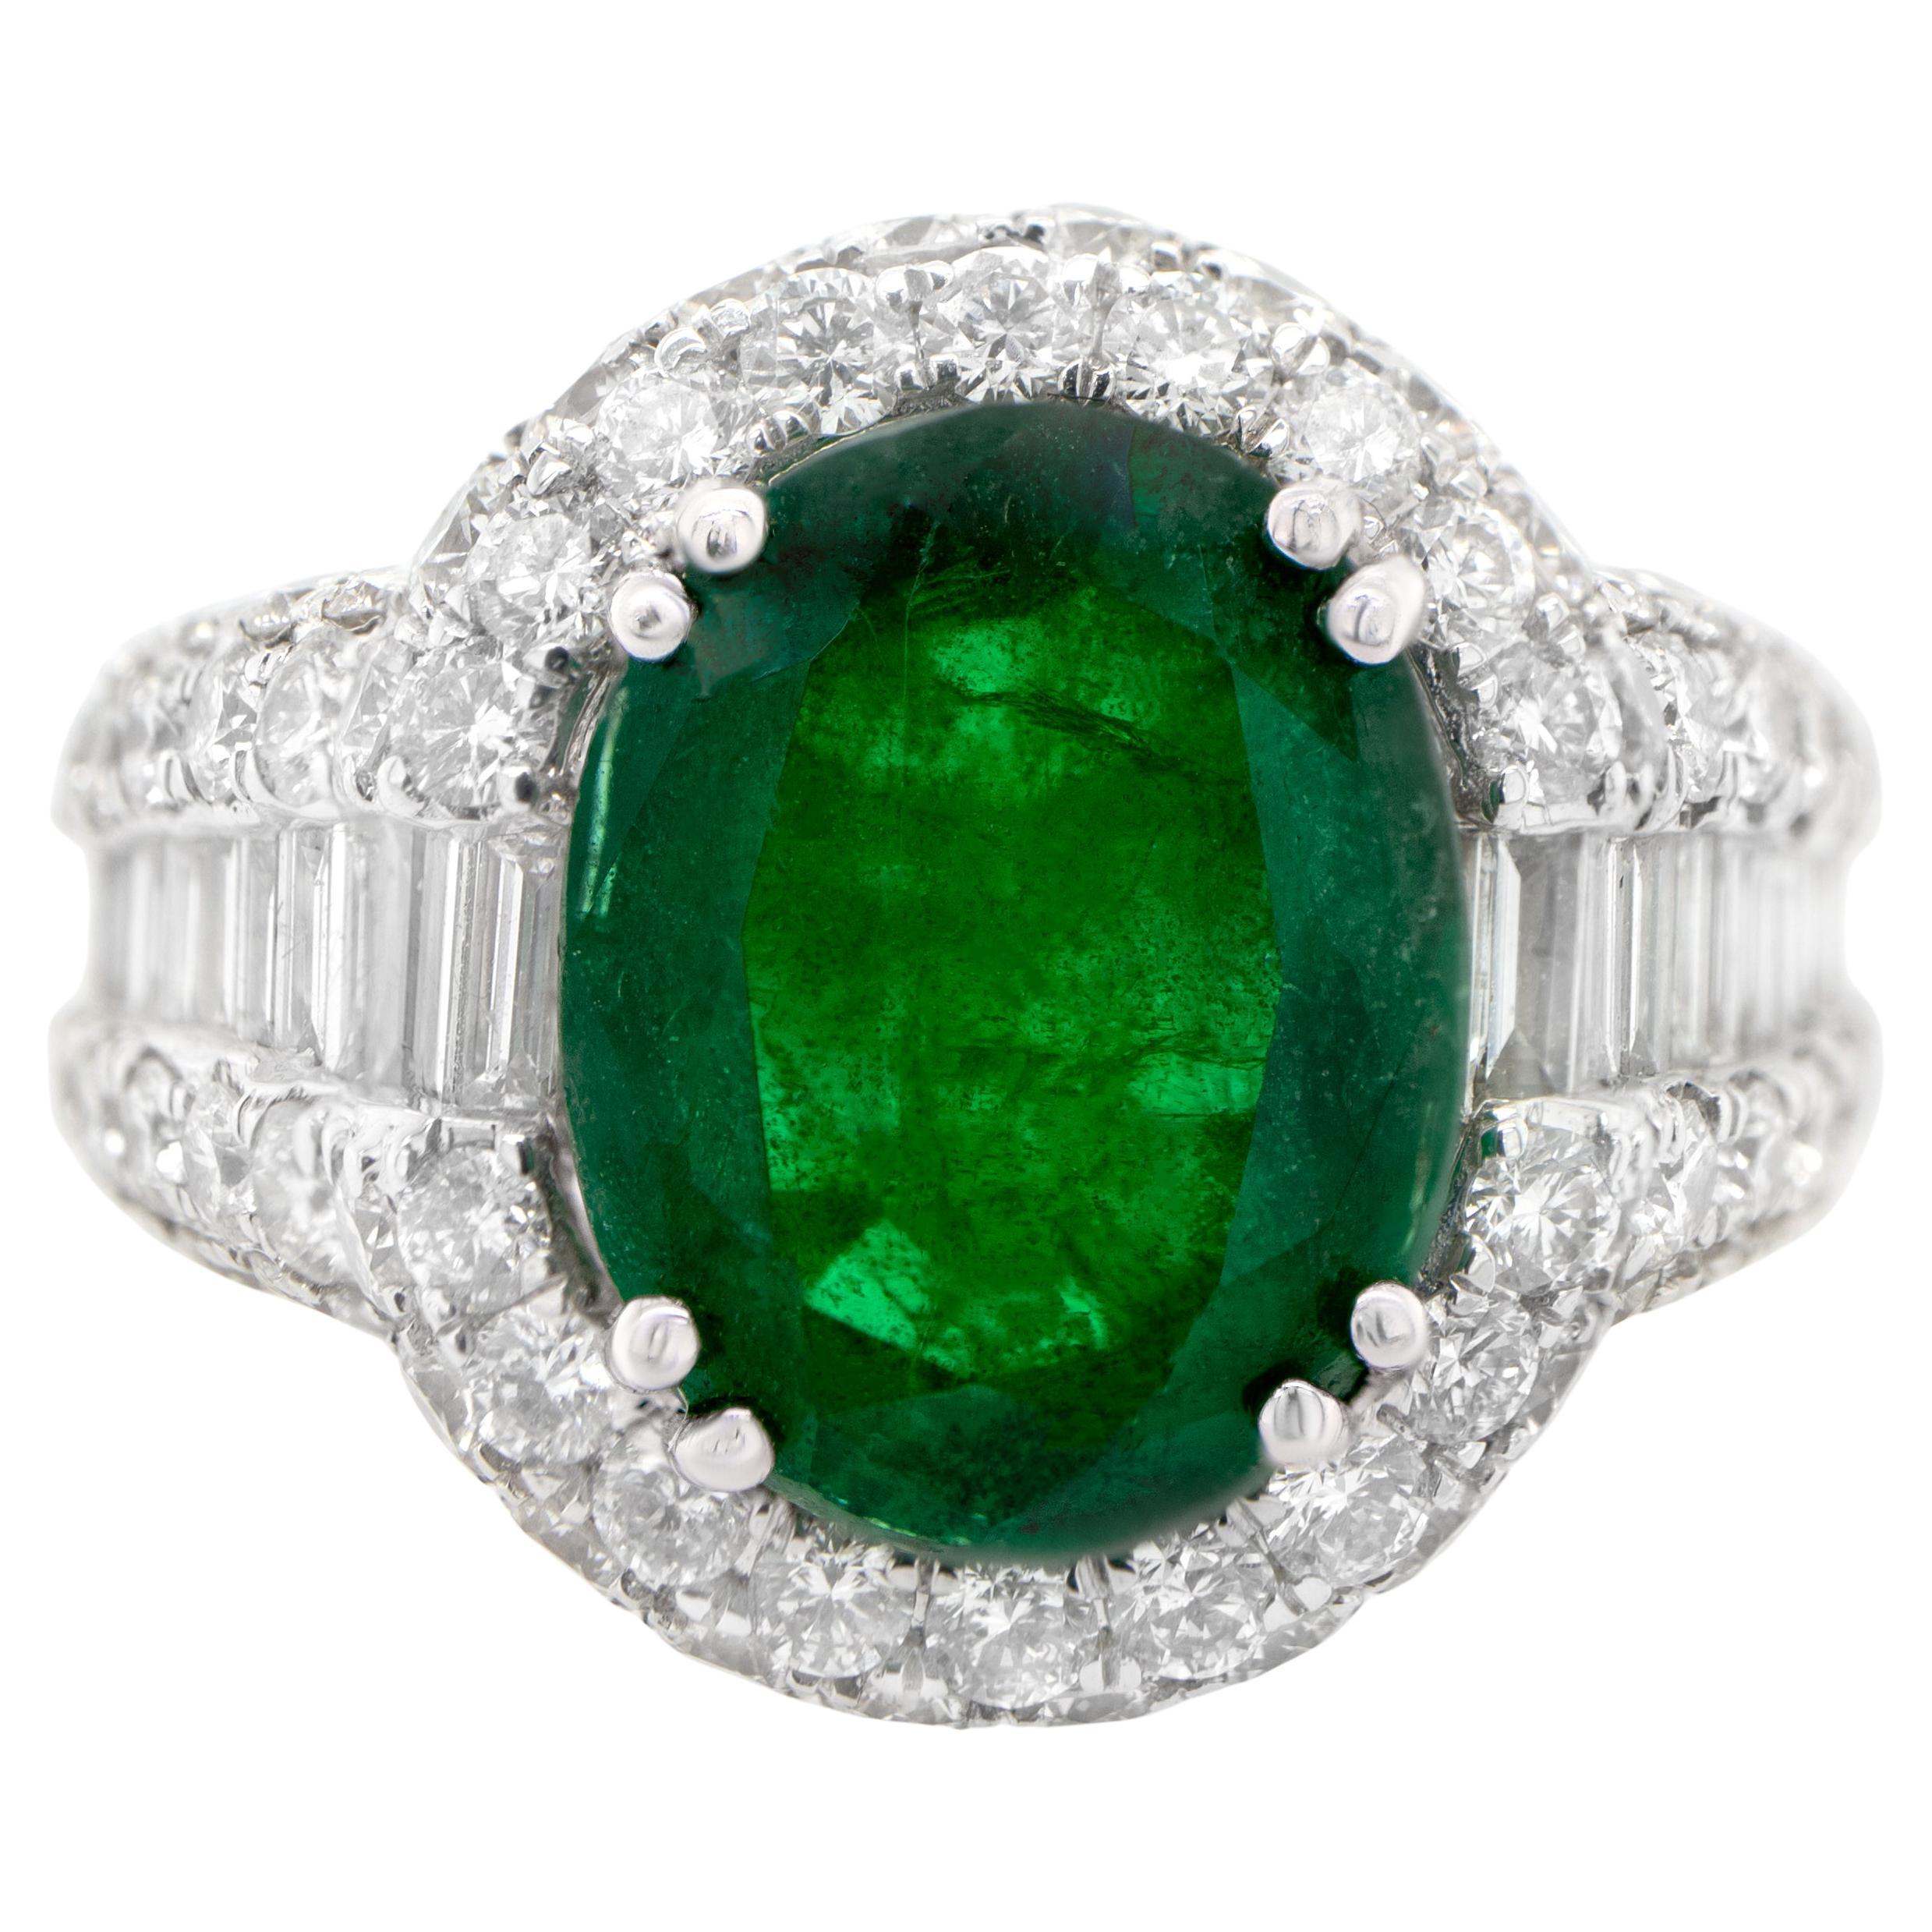 Oval Emerald Statement Ring With Diamond Setting 6.31 Carats 18K Gold